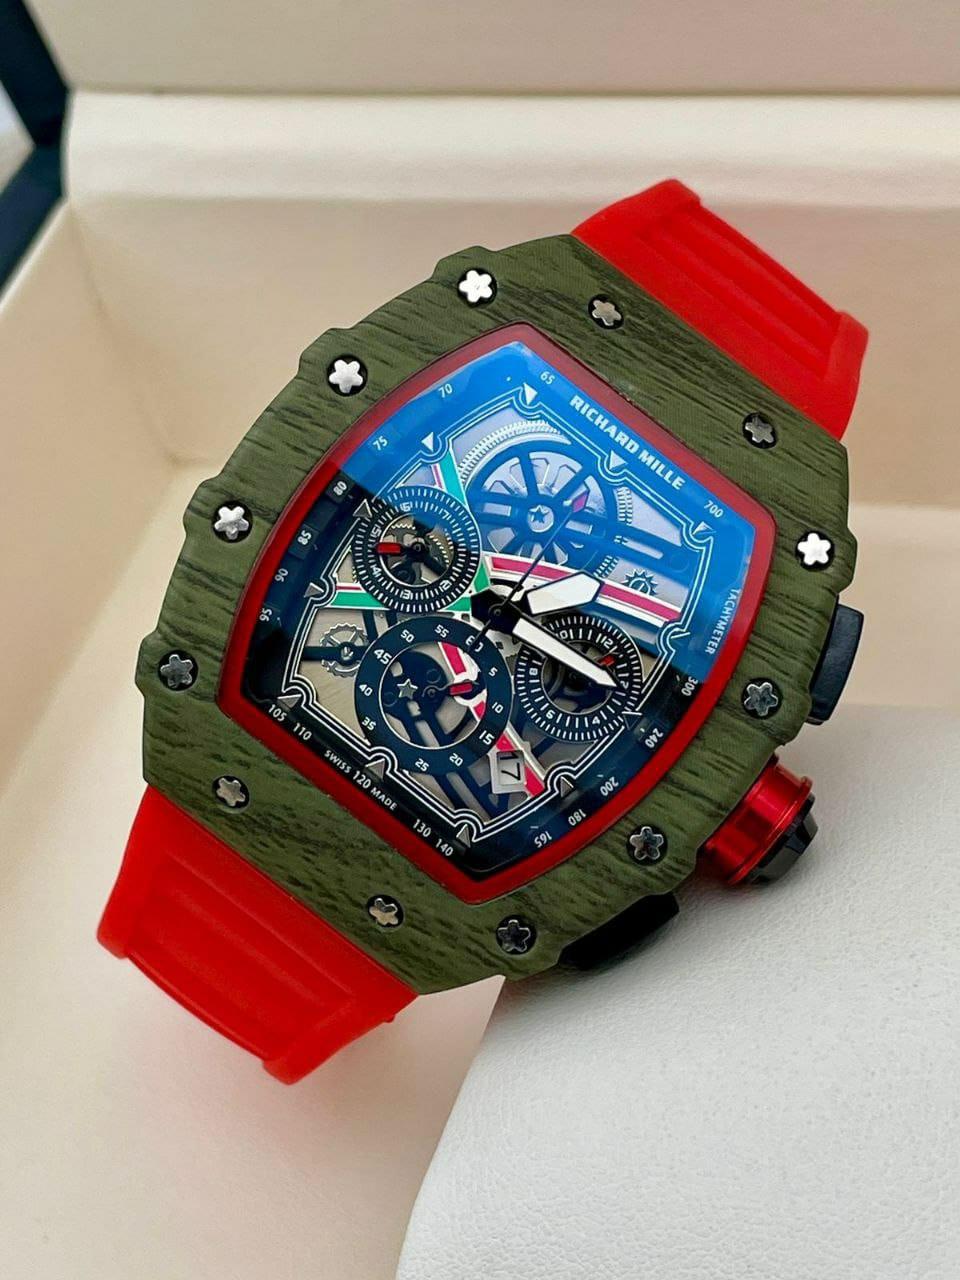 RICHARD MILLE** BRAND PRINTED BACK**FOR Men’s ** 7AAA* HIGH END QUALITY* Original model* Feature;* 12 hr dail * corono working * Date working - glareproofed sapphire crystal Glass, Fibre Strap-Quartz 